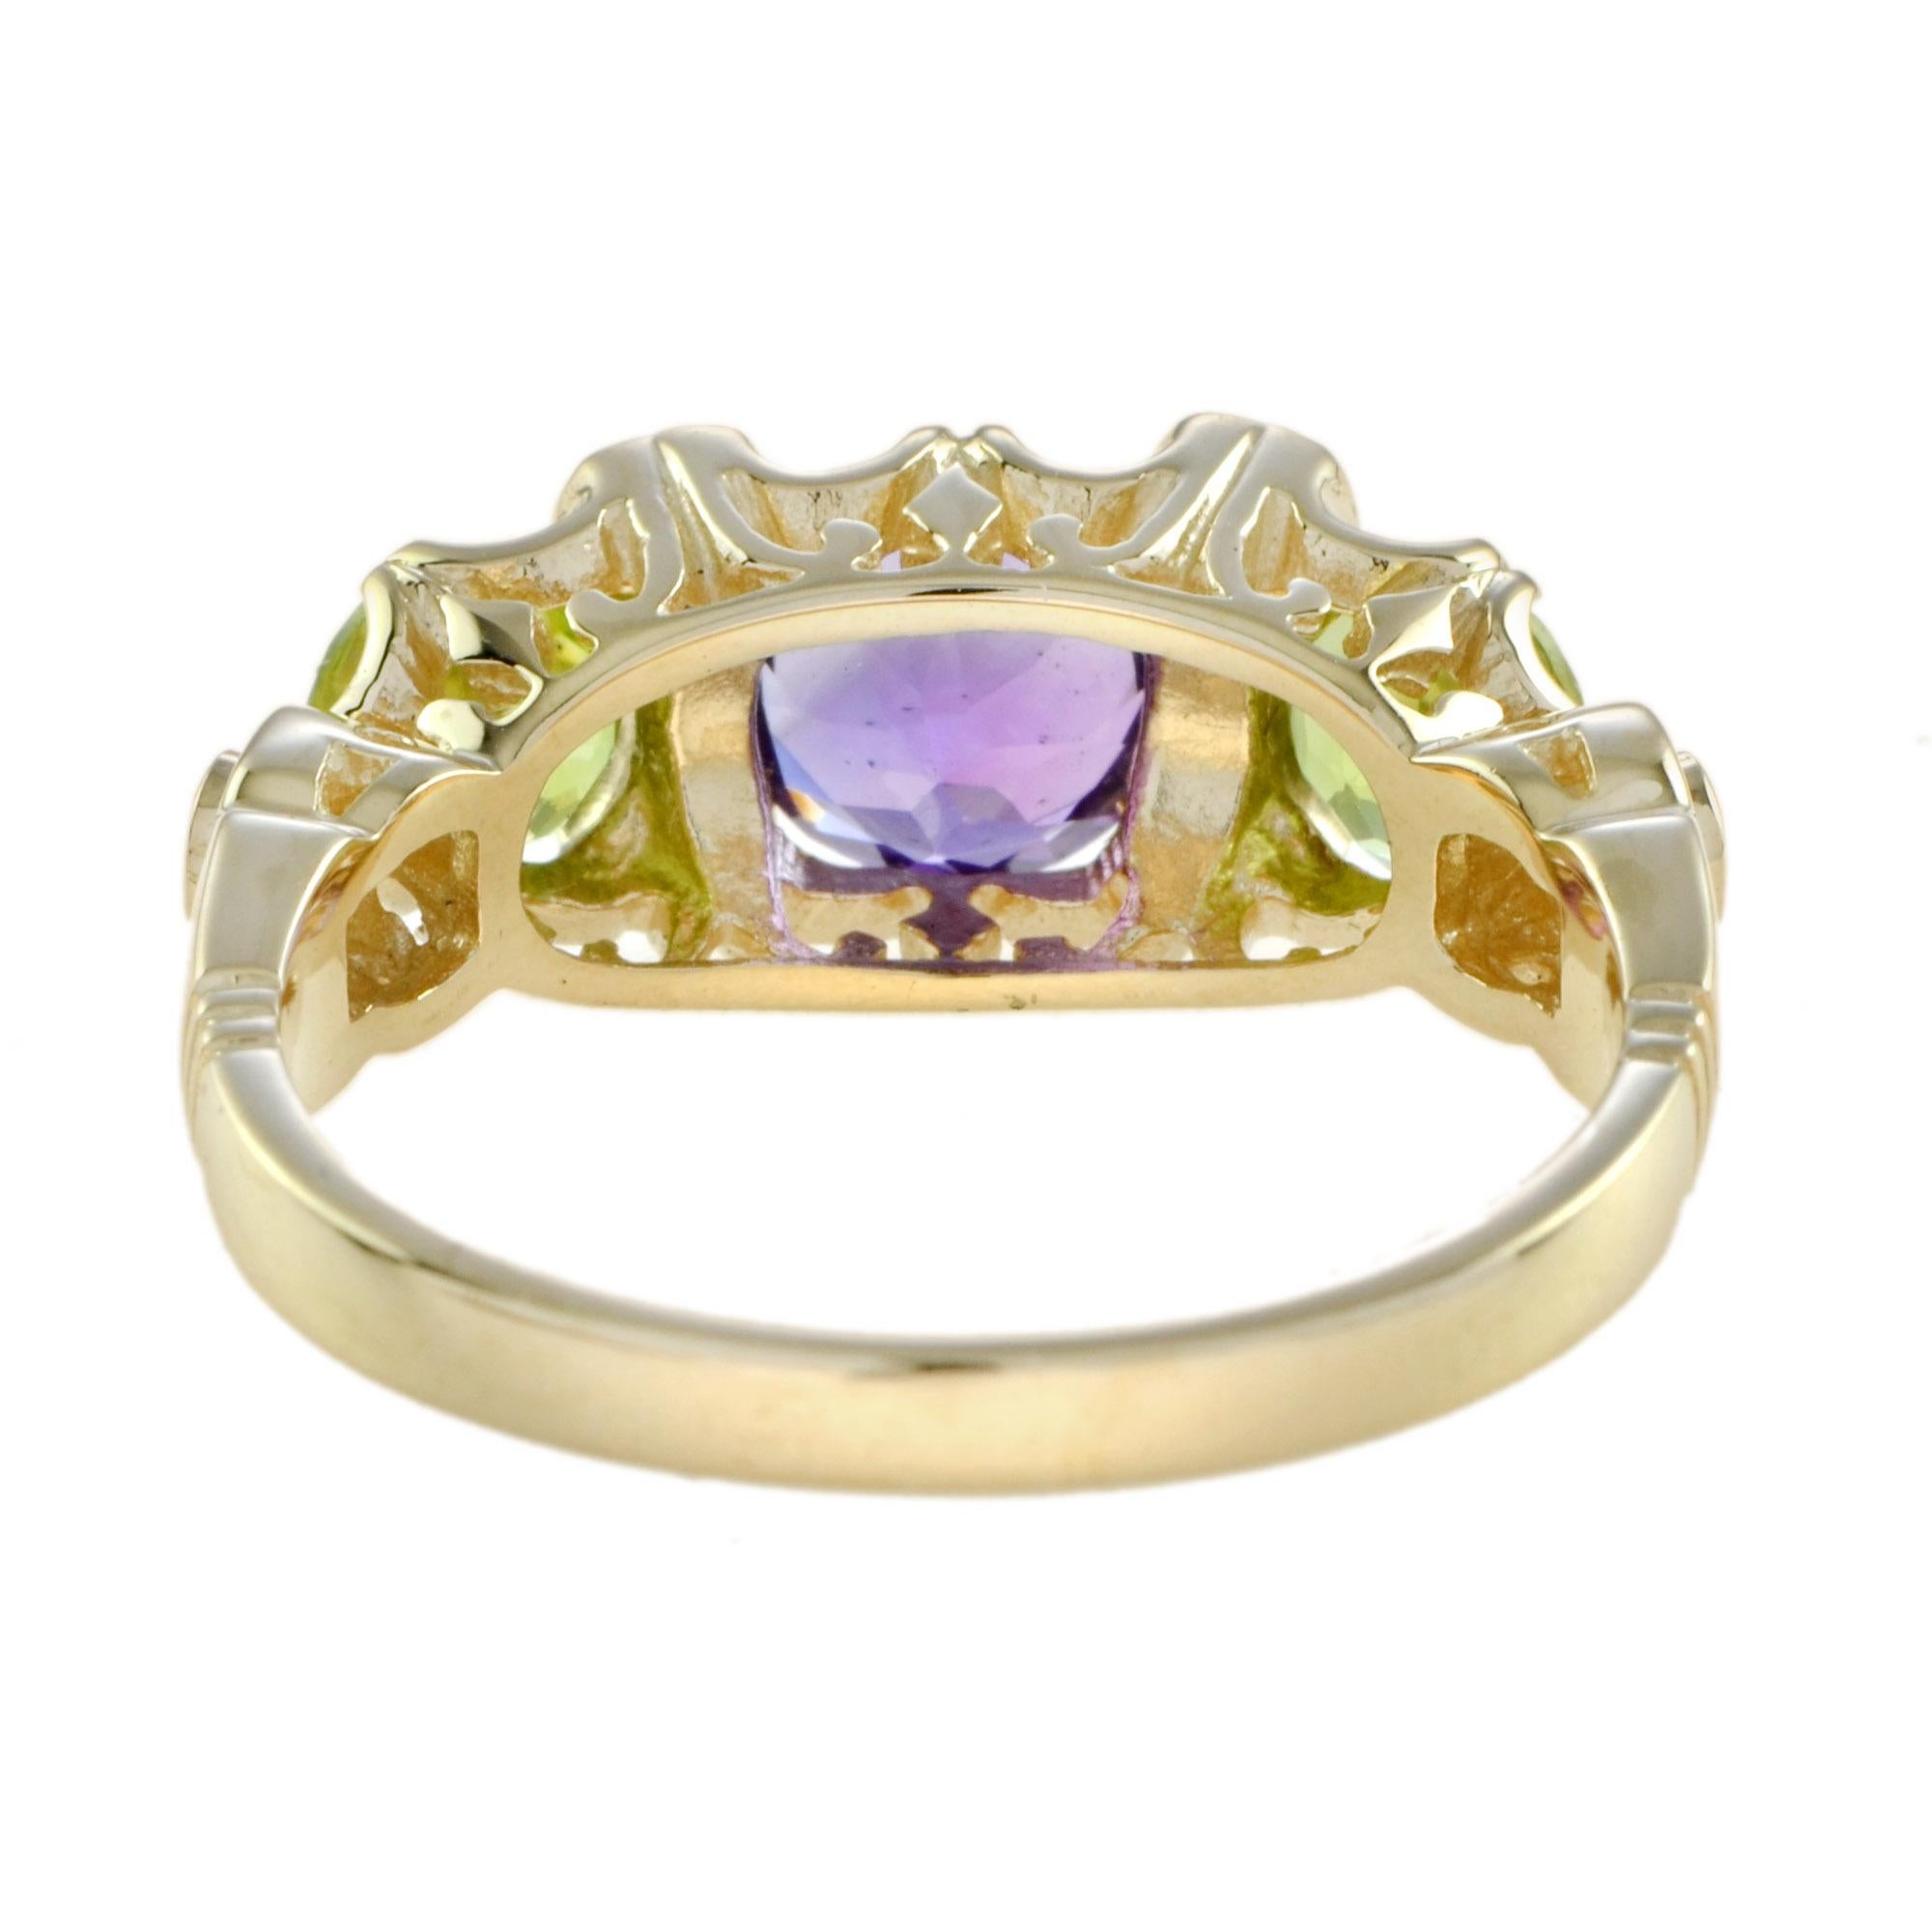 For Sale:  Amethyst Peridot and Opal Three Stone Ring in 14K Yellow Gold 4